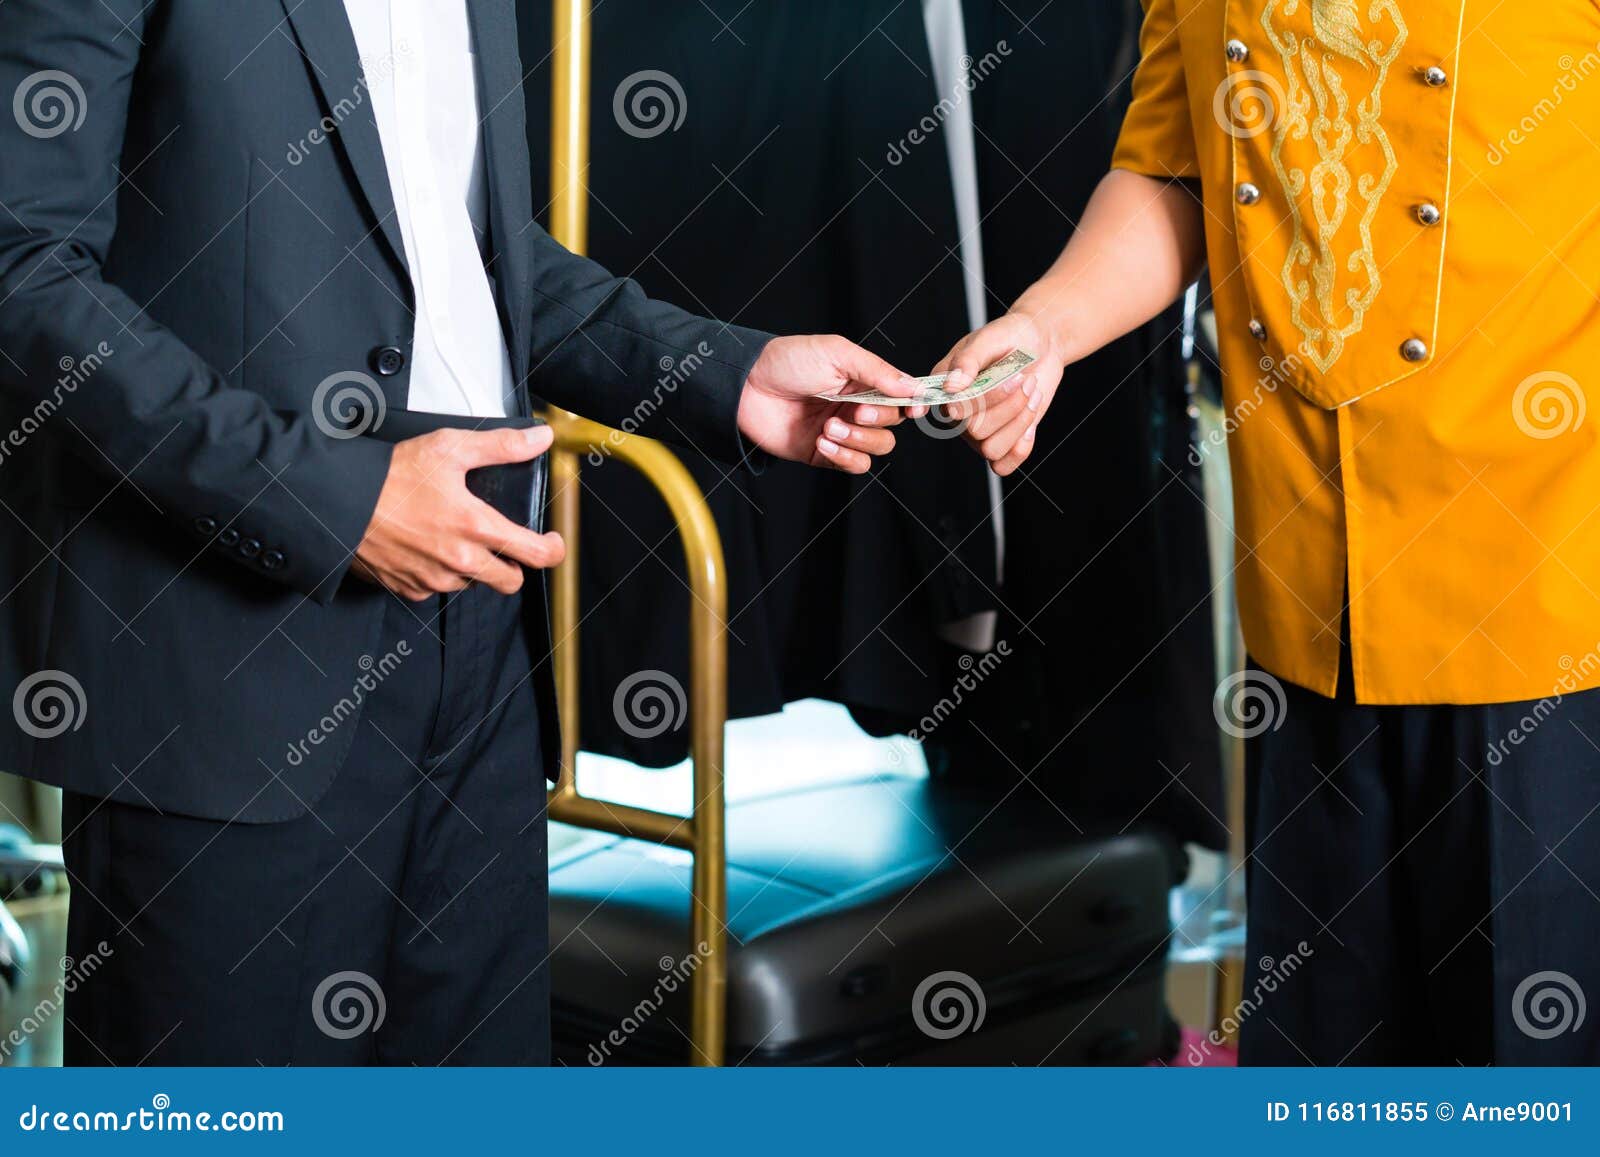 midsection view of man giving tip in hotel